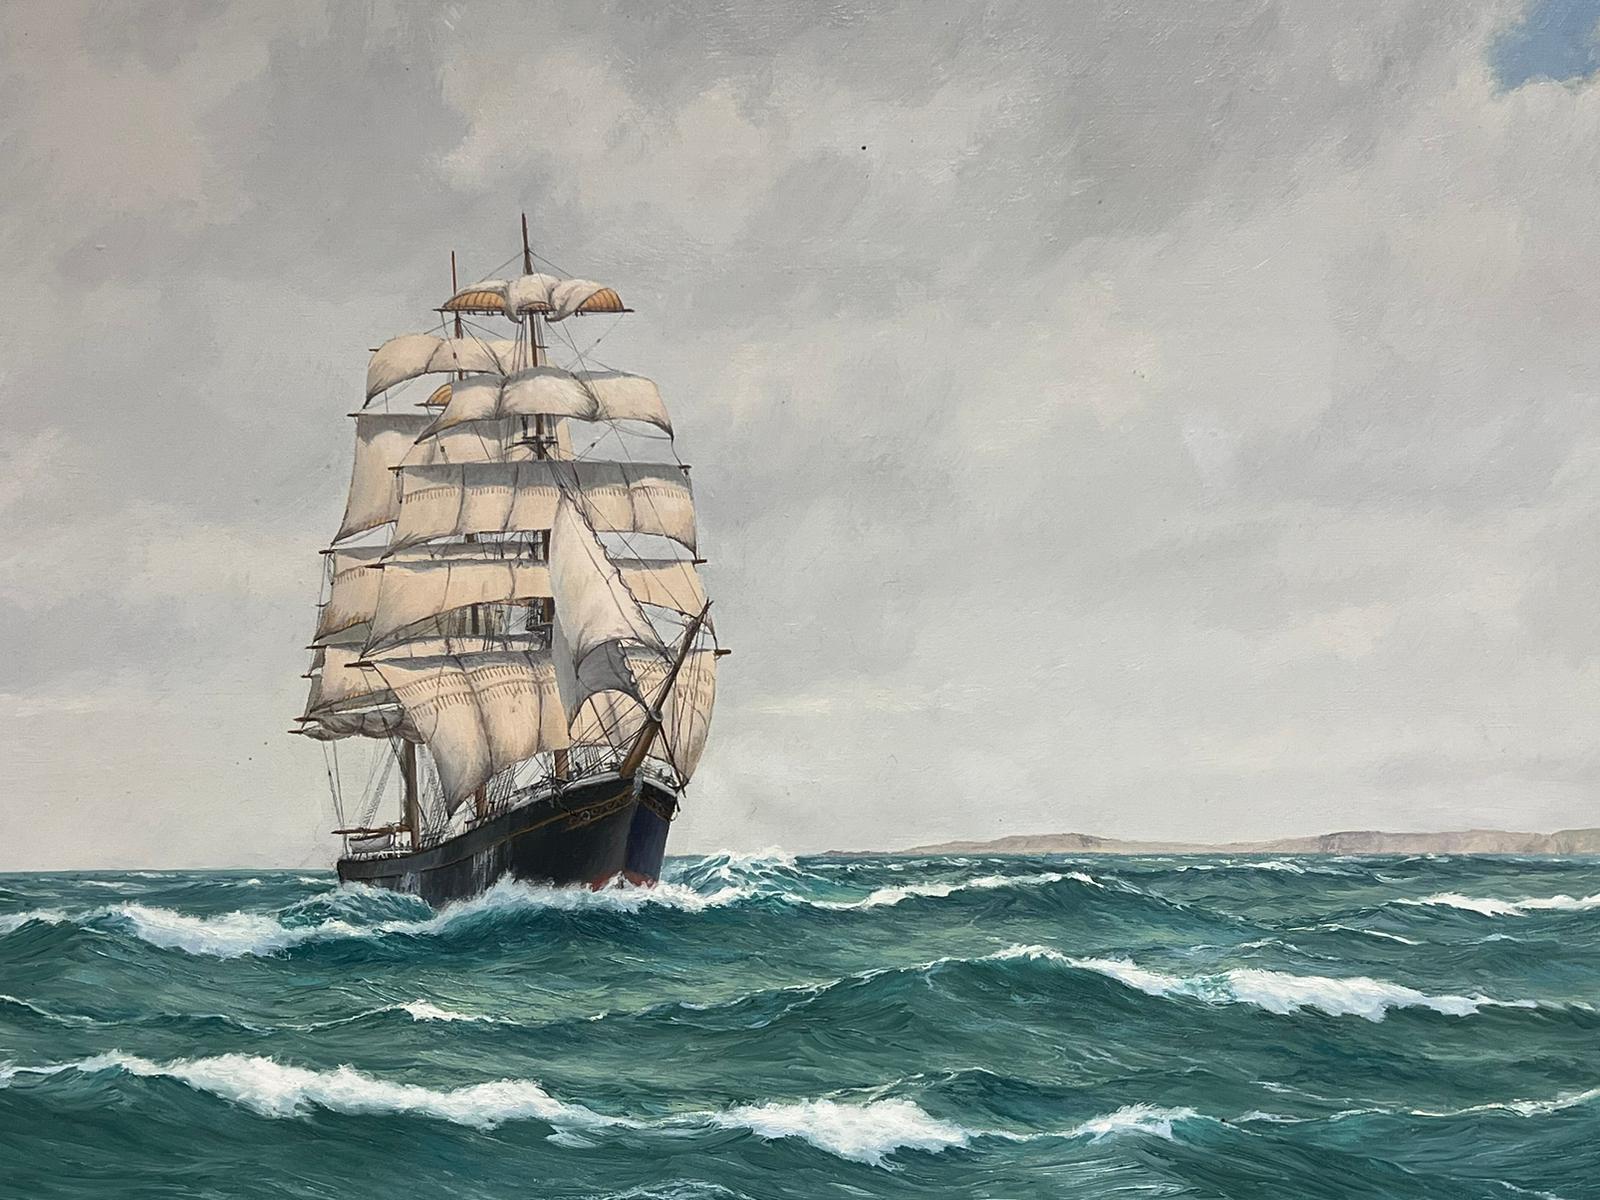 The Sailing Ship
by William John Popham (British, 20th century)
signed oil on canvas, framed
framed: 29.5 x 42 inches
canvas: 24 x 36 inches
provenance: private collection, Scotland
condition: very good and sound condition

The artist has paintings